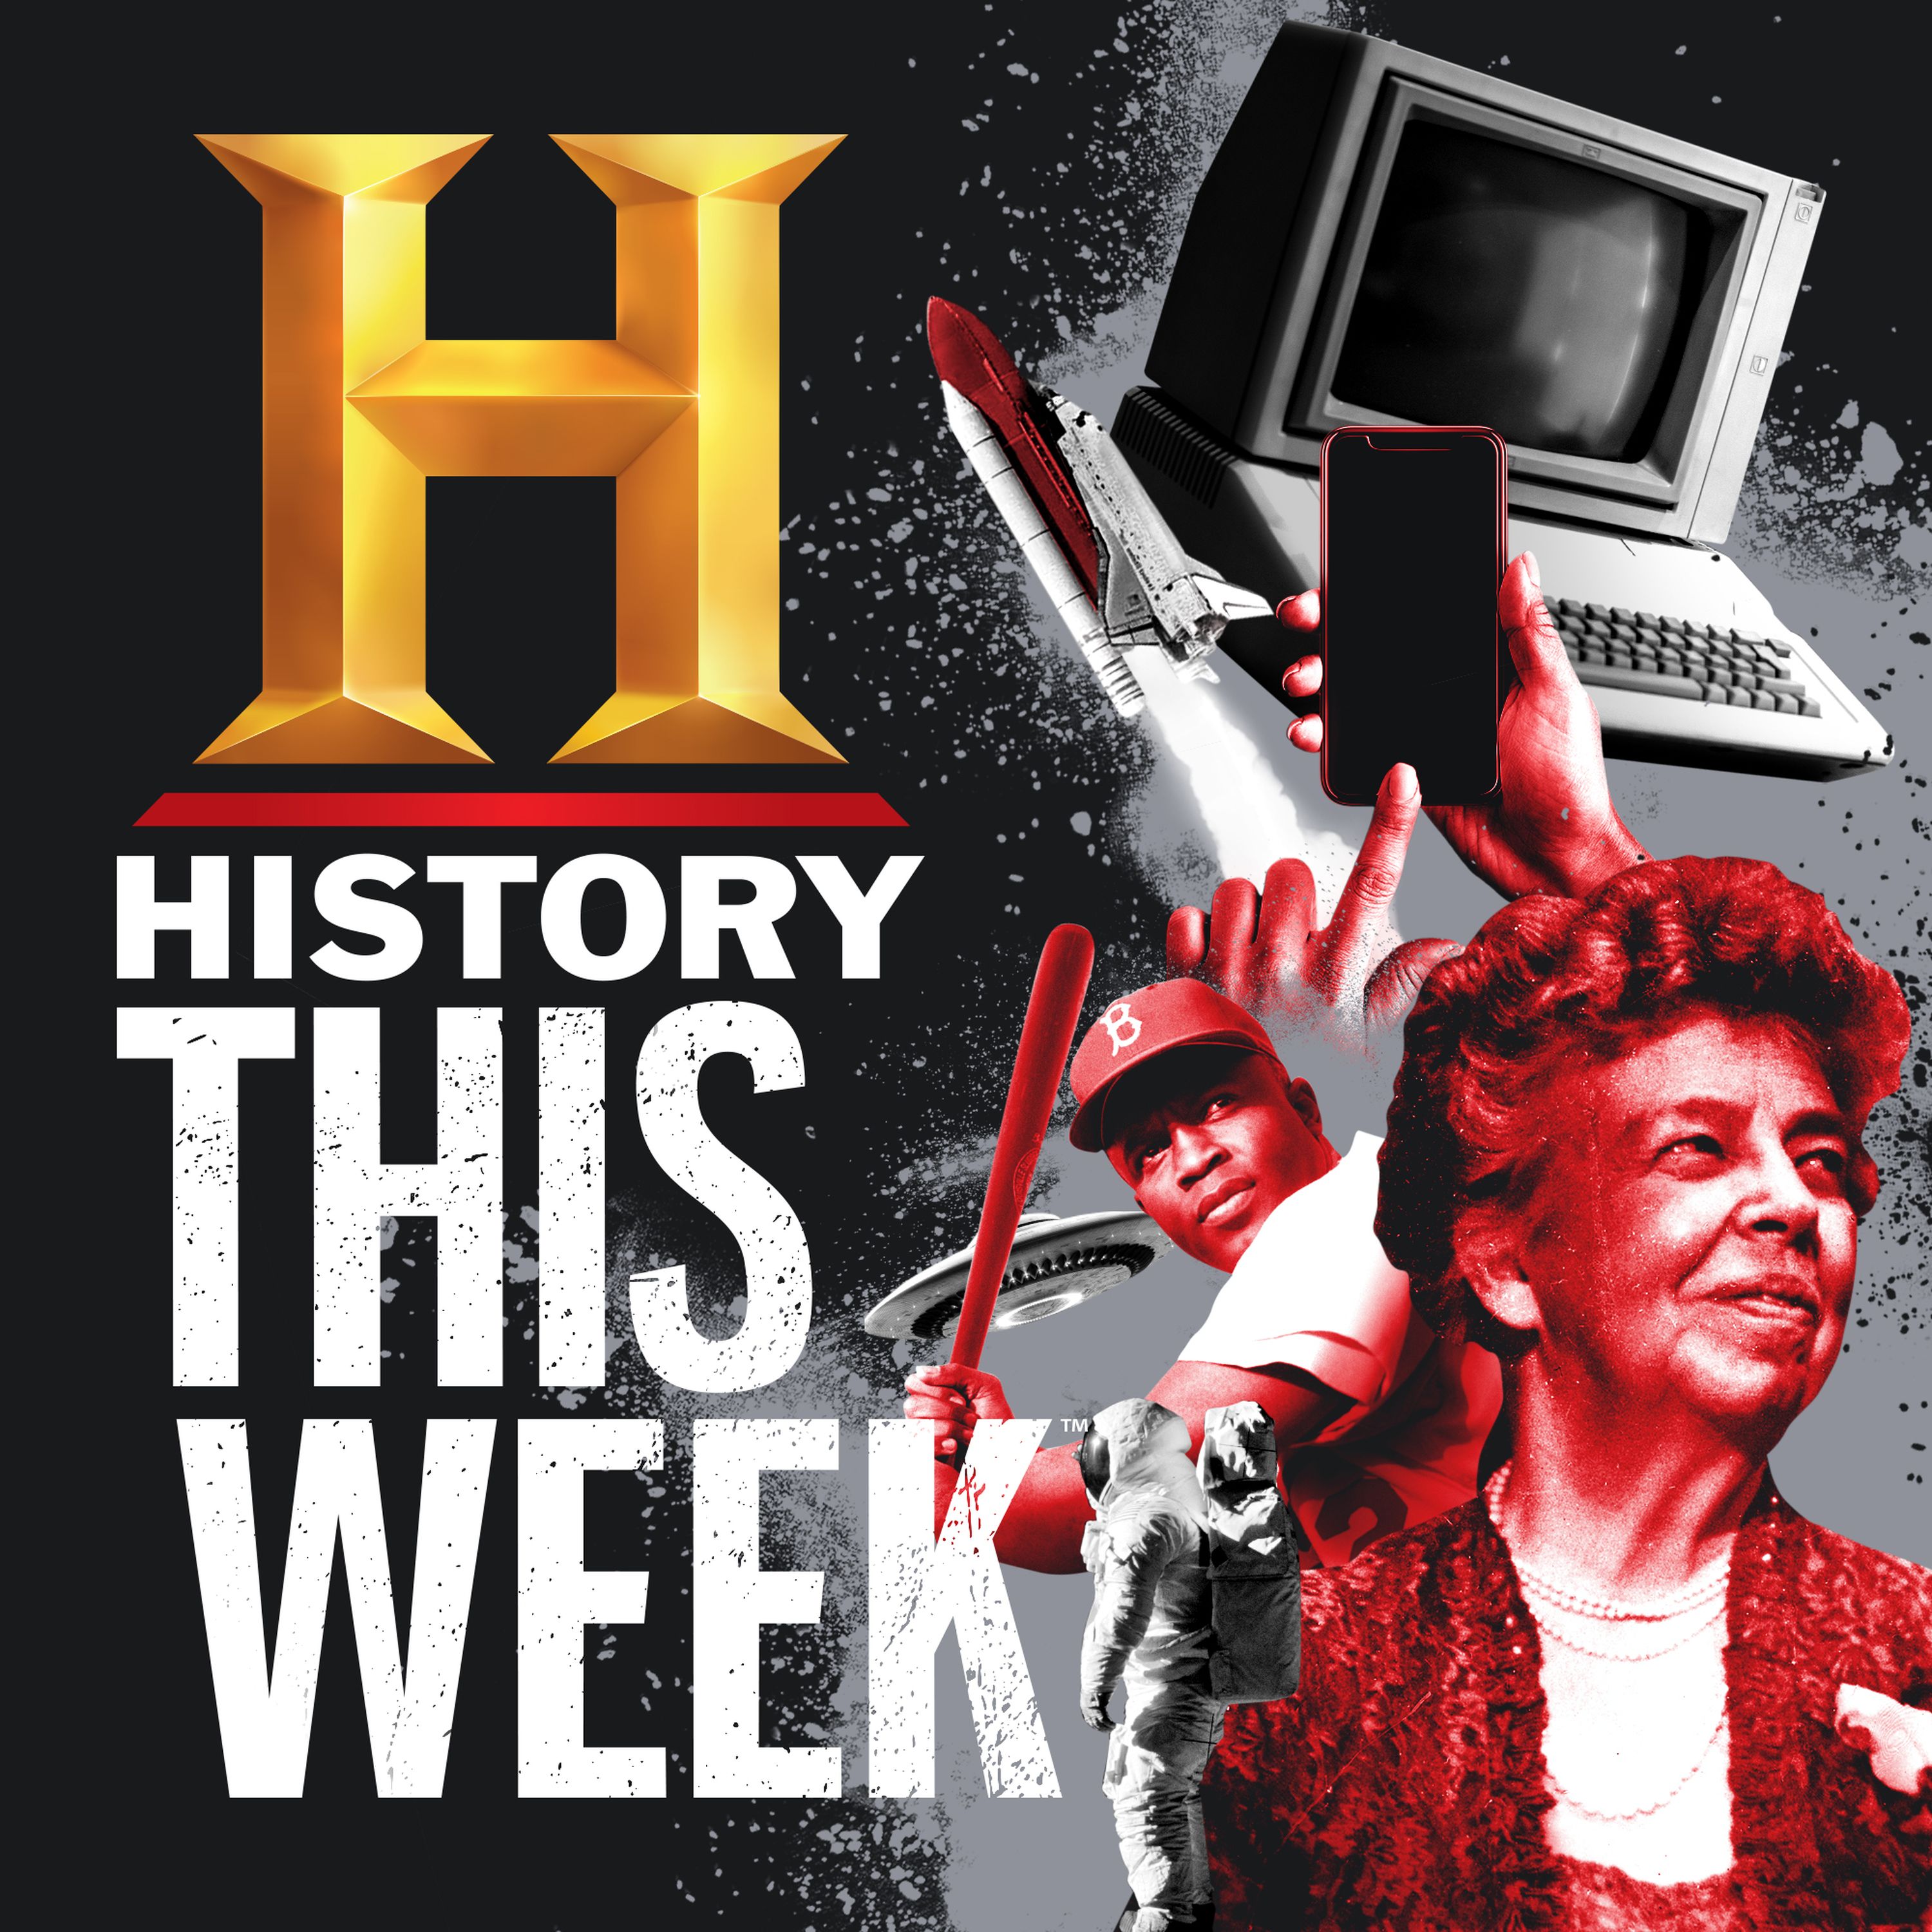 HISTORY This Week podcast